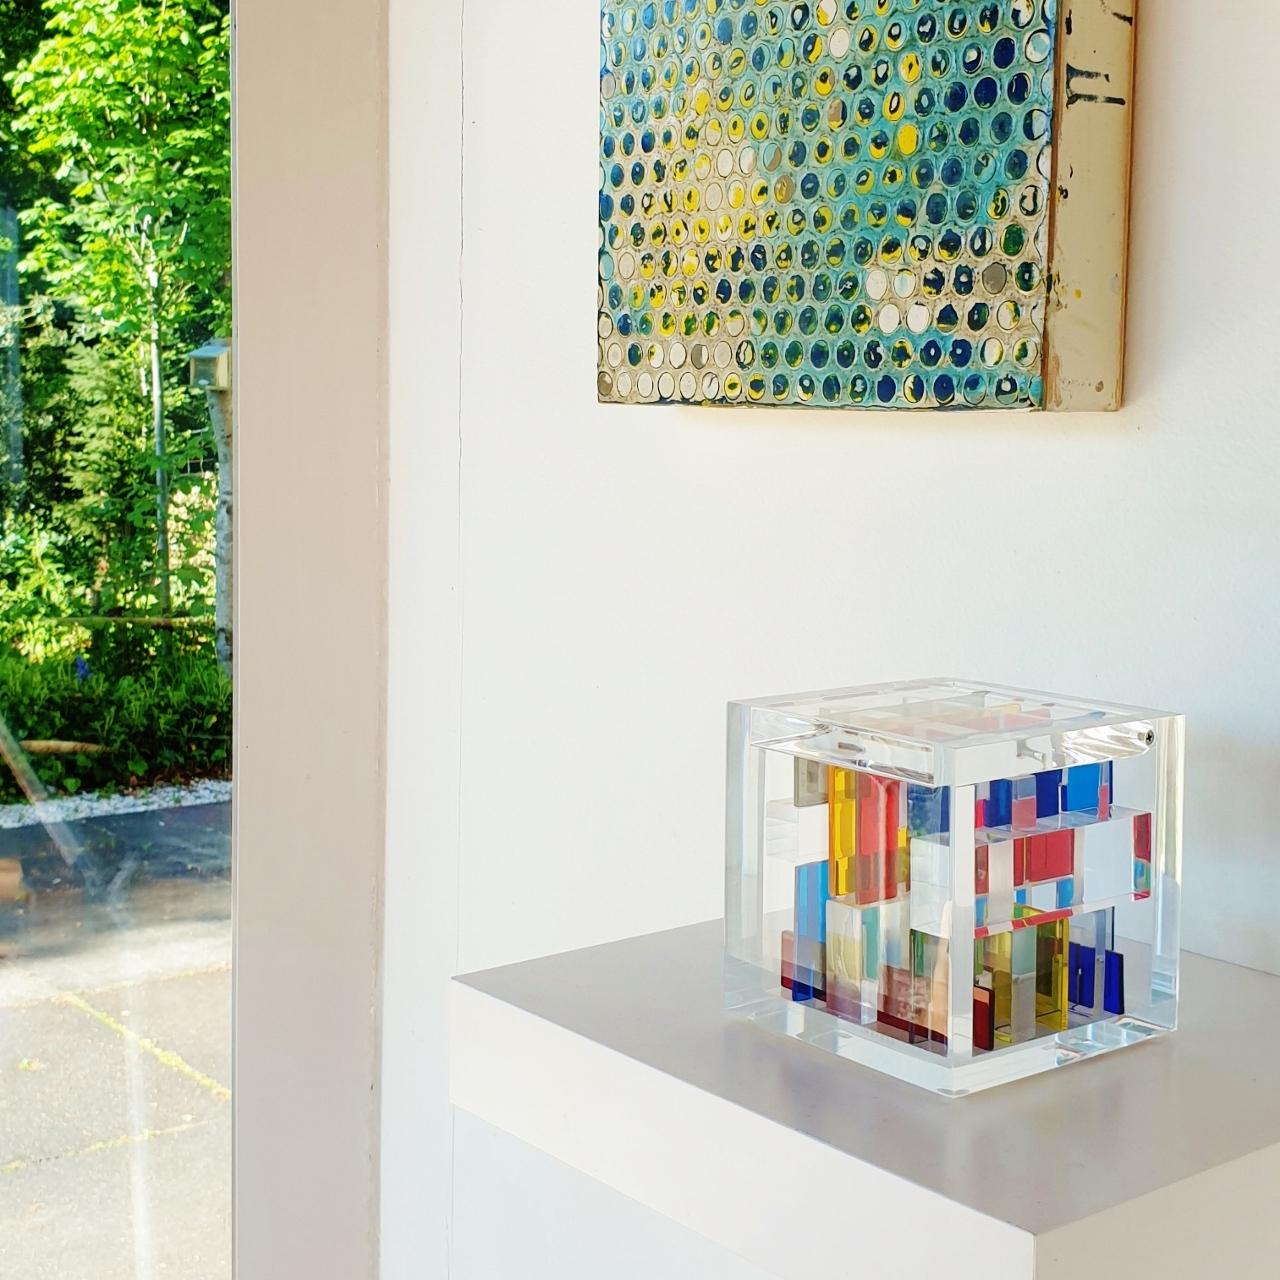 Homage to Mondriaan - contemporary modern abstract geometric cube sculpture - Sculpture by Haringa + Olijve